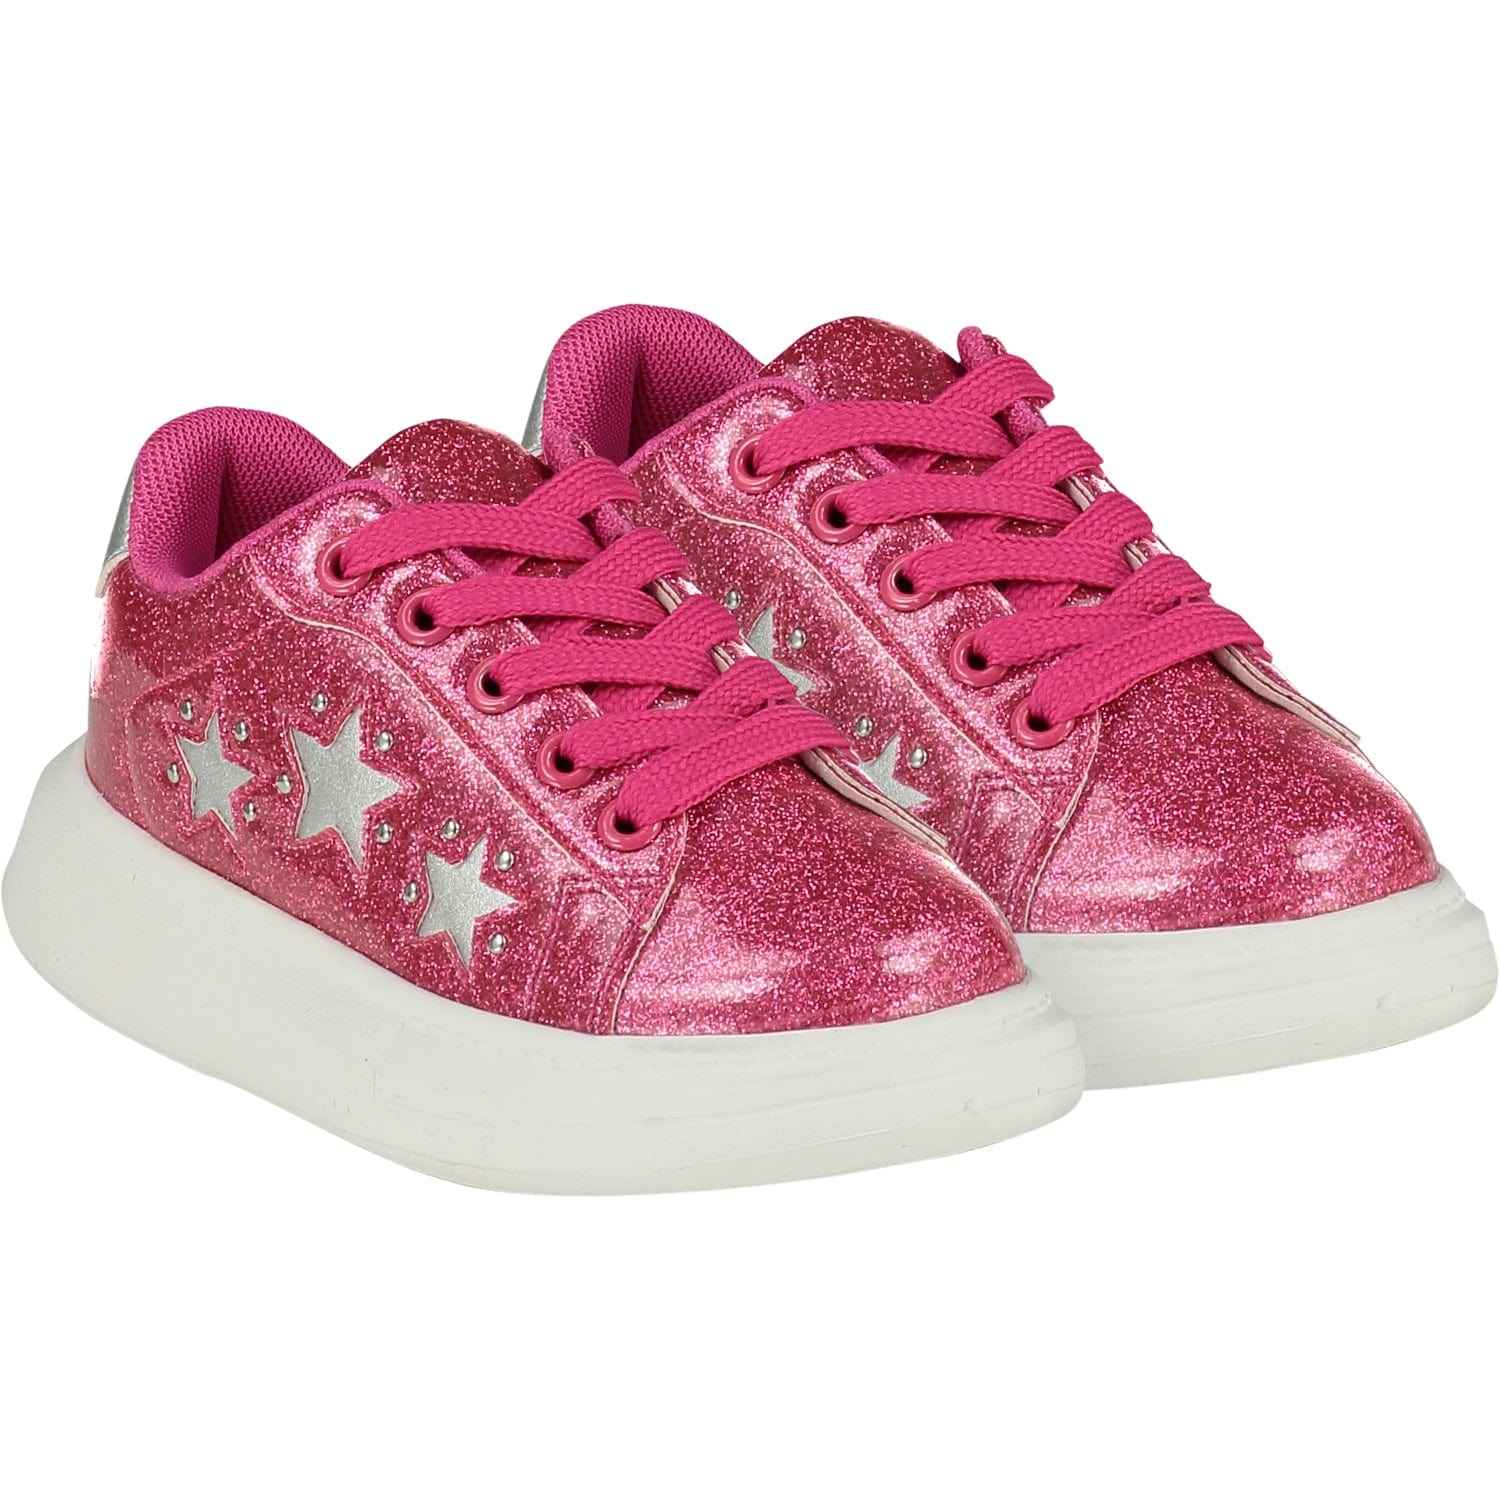 A DEE - Queeny Chunky Star Trainers - Pink Glaze